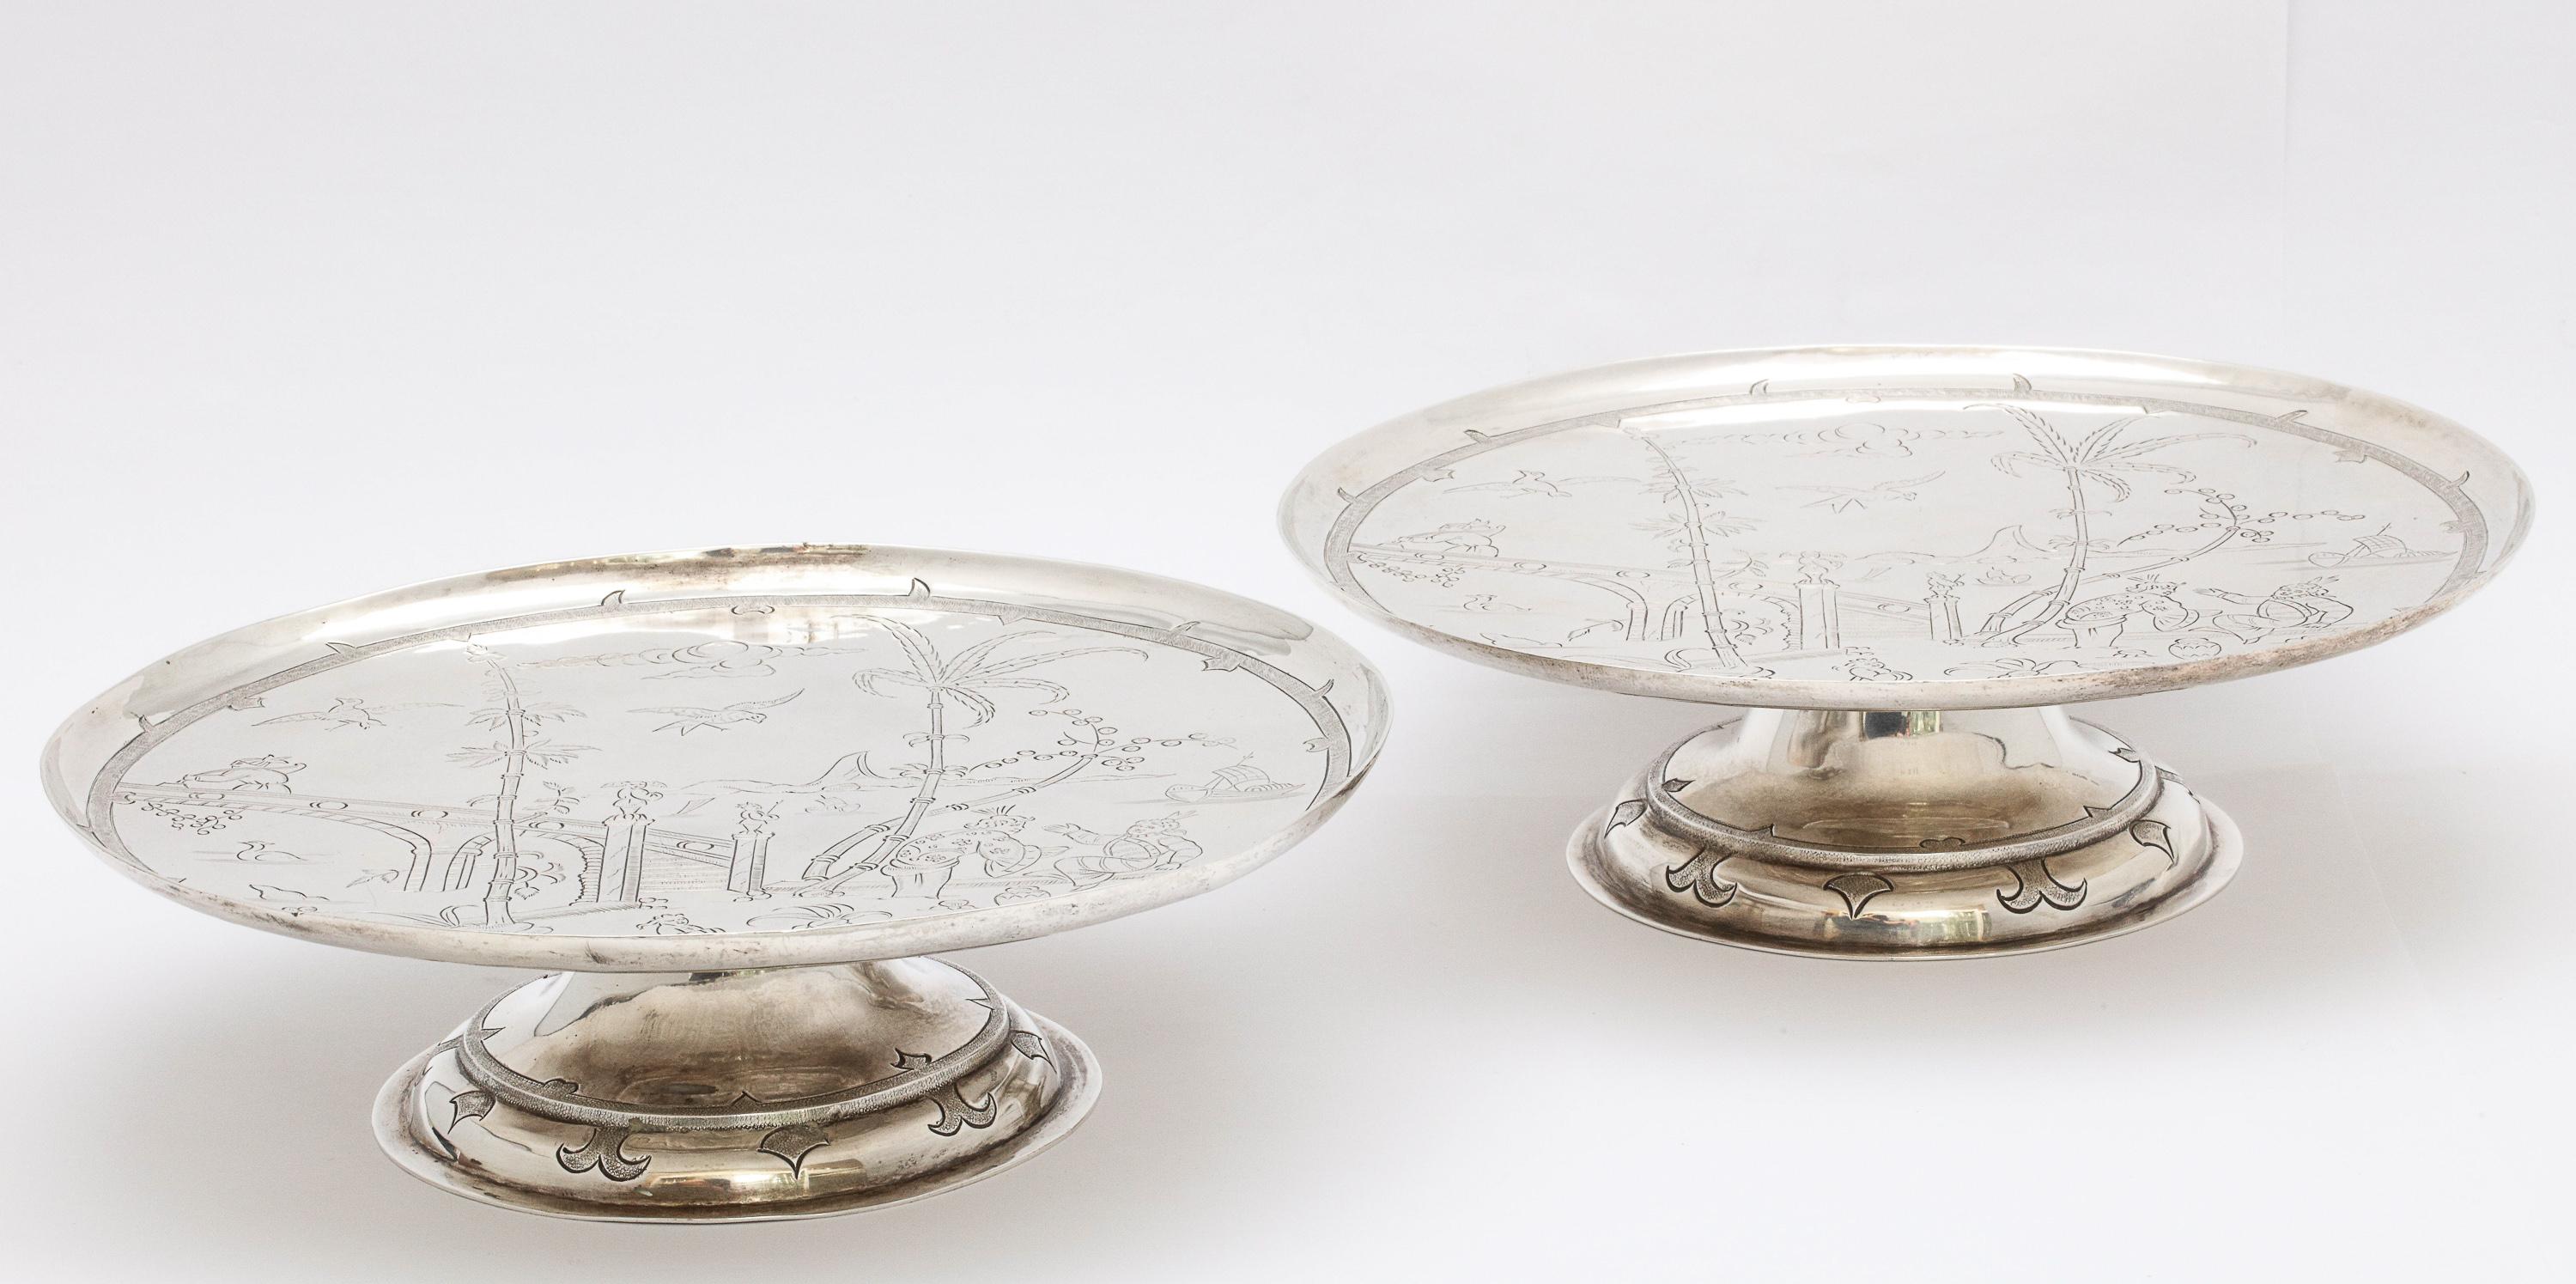 Pair of Edwardian Chinoiserie-Style Sterling Silver Tazzas by Crichton 11